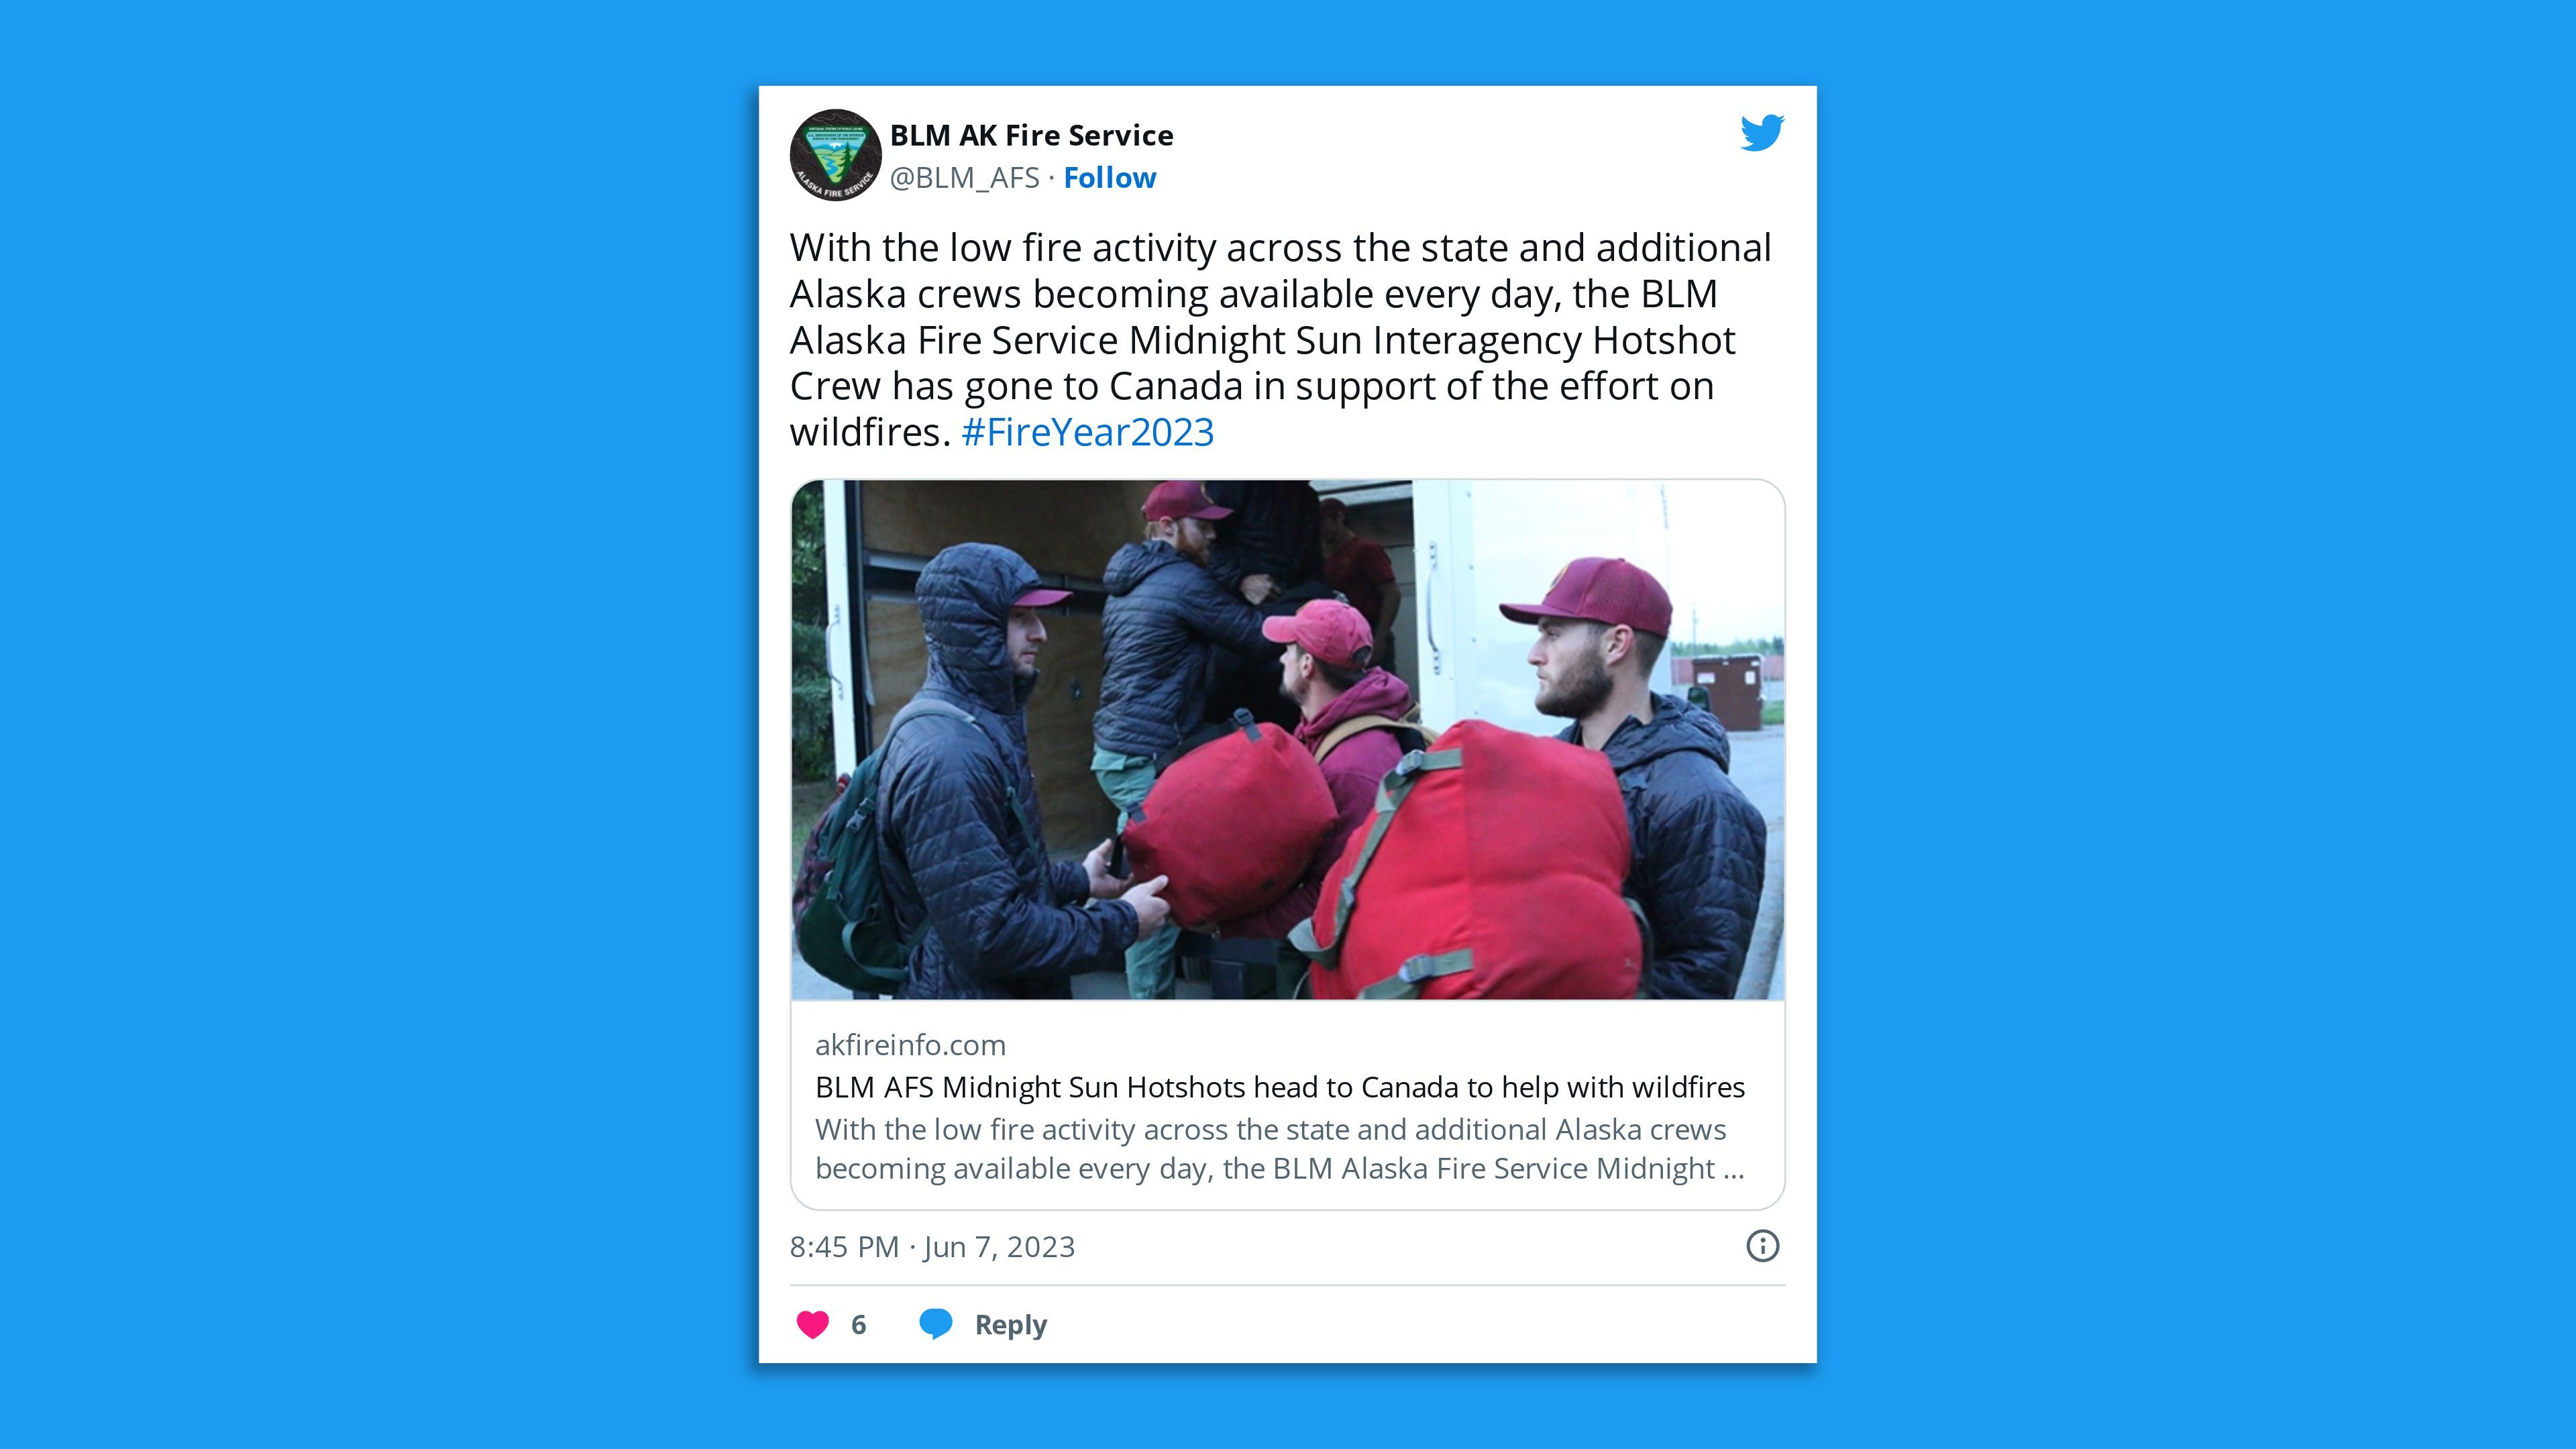 A screenshot of a Bureau of Land Management Alaska tweet saying: "With the low fire activity across the state and additional Alaska crews becoming available every day, the BLM Alaska Fire Service Midnight Sun Interagency Hotshot Crew has gone to Canada in support of the effort on wildfires."